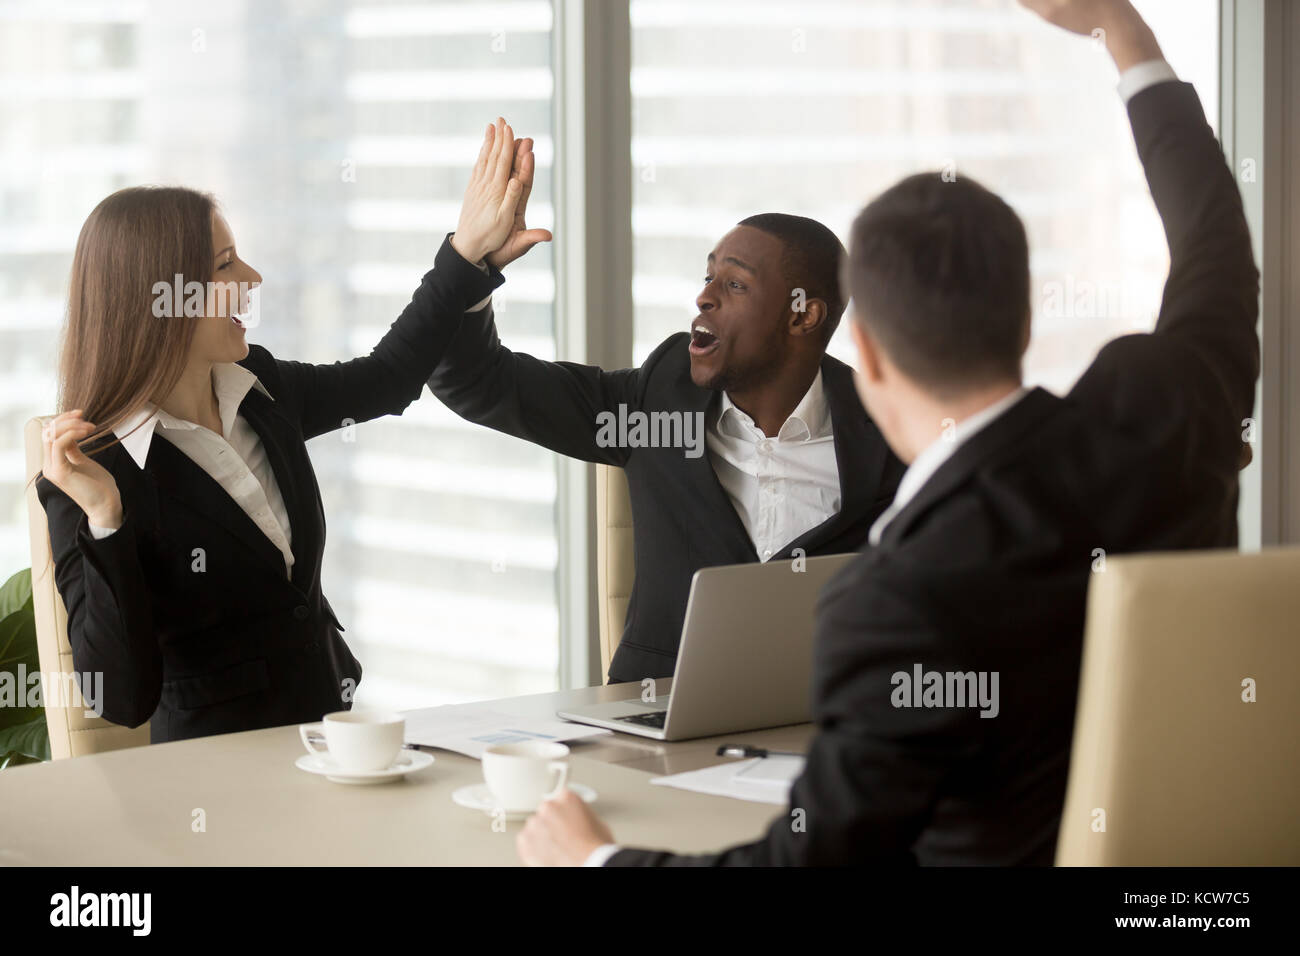 Excited office workers giving high five celebrating wages or sales increase, successful deal, promotion at work concept. Happy diverse ethnicity busin Stock Photo